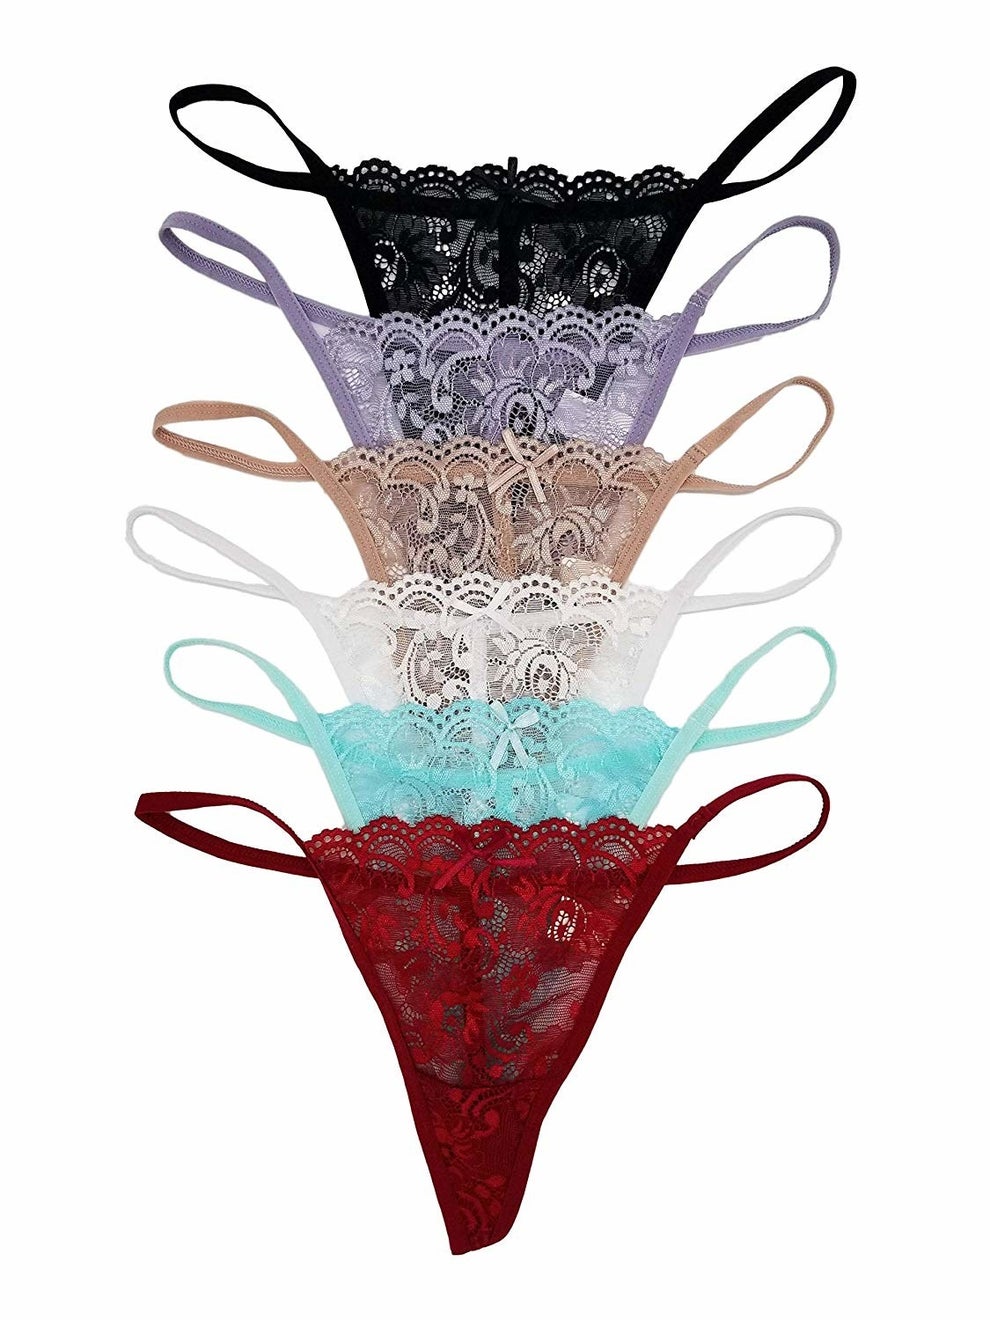 21 Comfortable, Sexy Underwear You'll Be Glad You Own